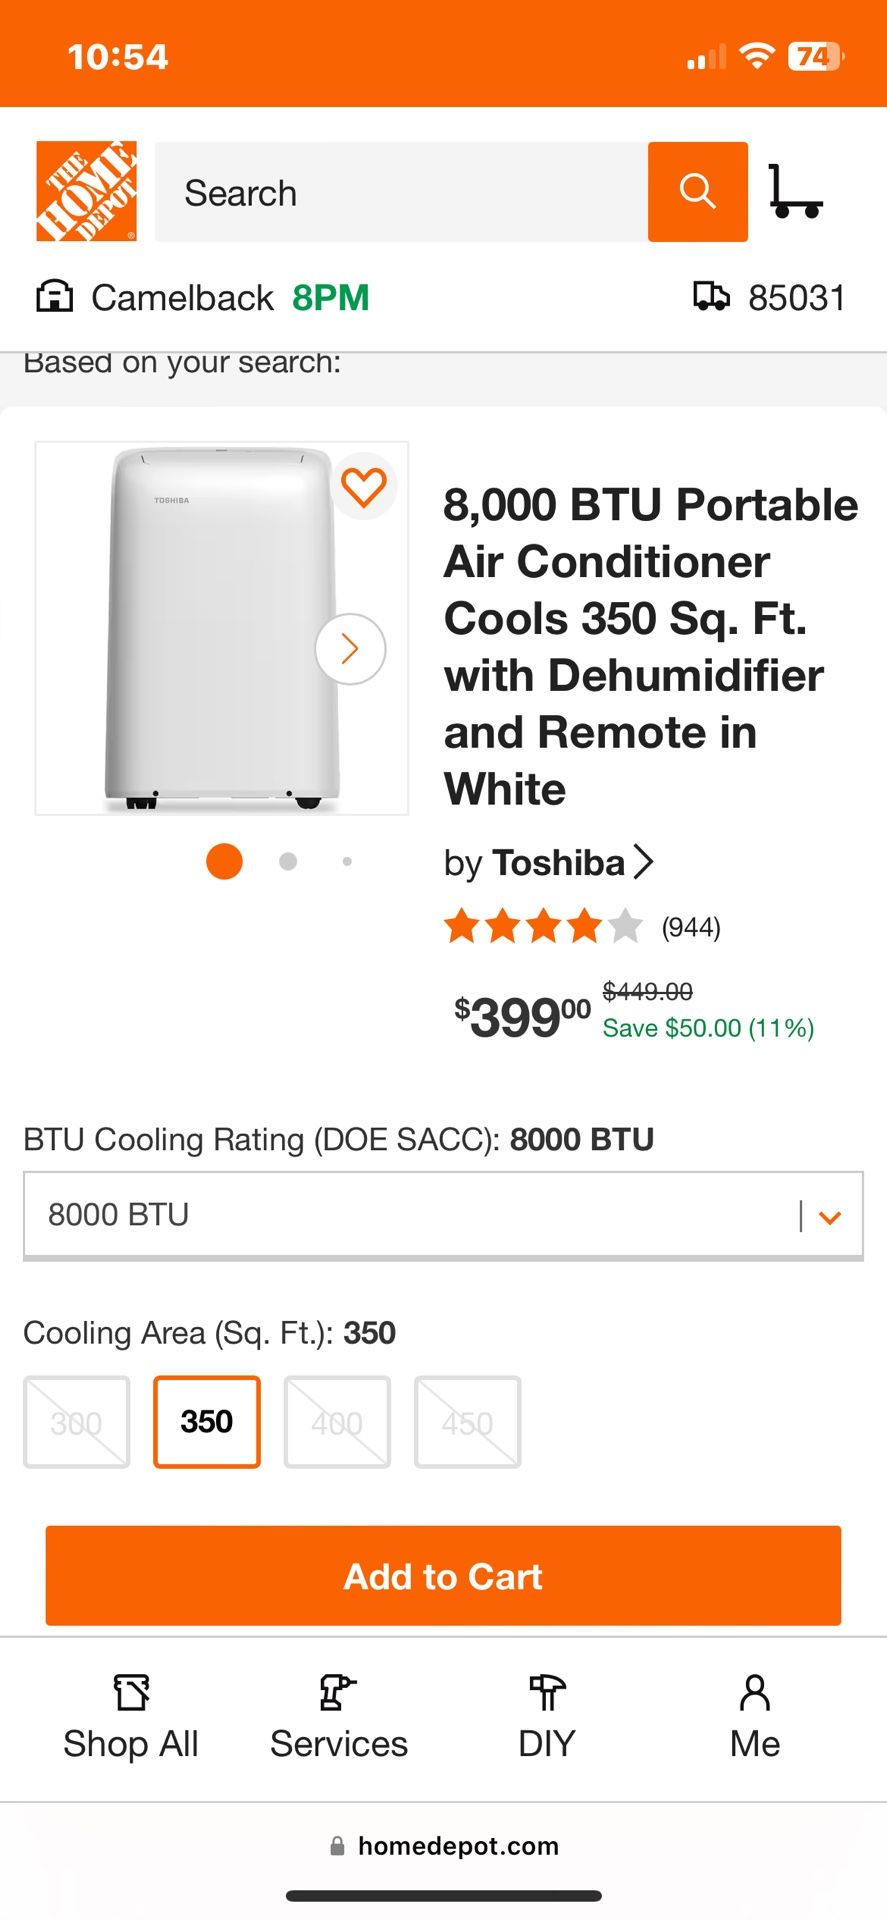 8,000 BTU Portable Air Conditioner Cools 350 Sq. Ft. with Dehumidifier 